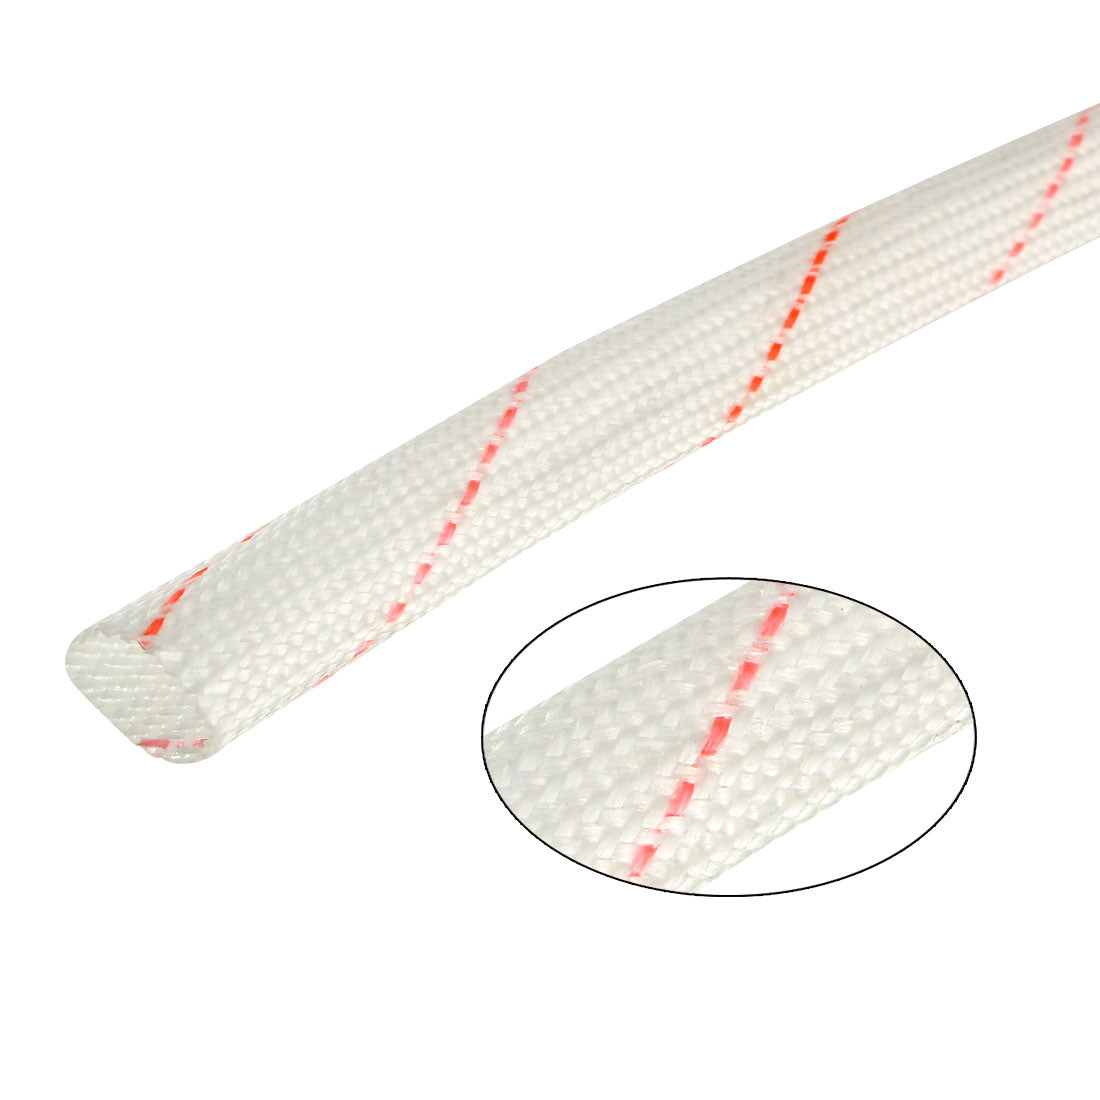 uxcell Uxcell Fiberglass Sleeve 10mm I.D. PVC Insulation Tubing 1500V Tube Adjustable Sleeving Pipe 125 Degree Centigrade Cable Wrap Wire 750mm 2.46ft White and Red